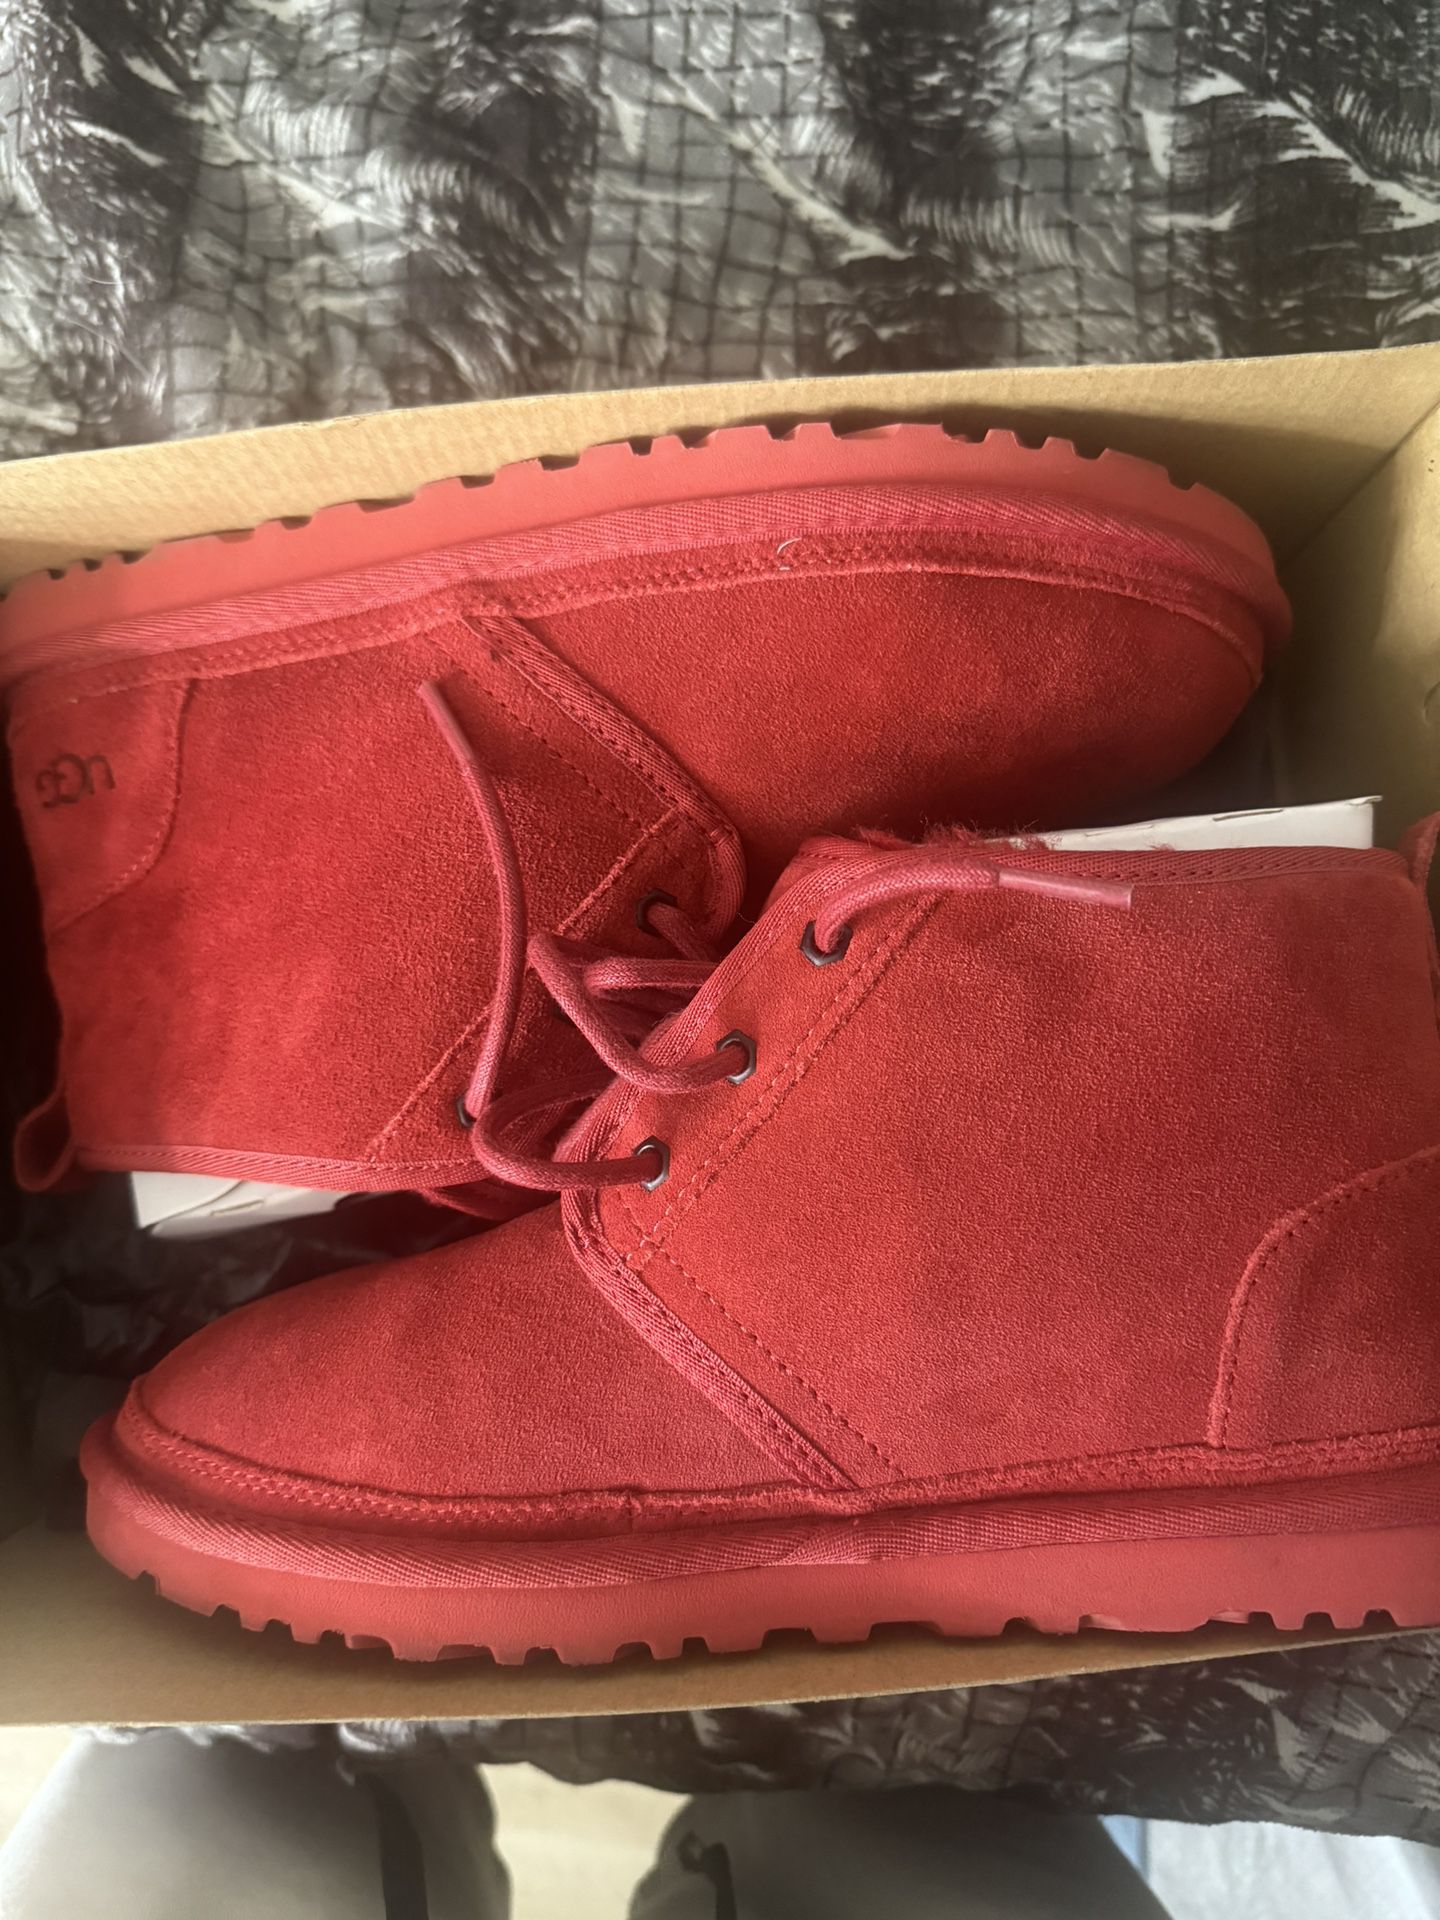 red uggs size 9M 